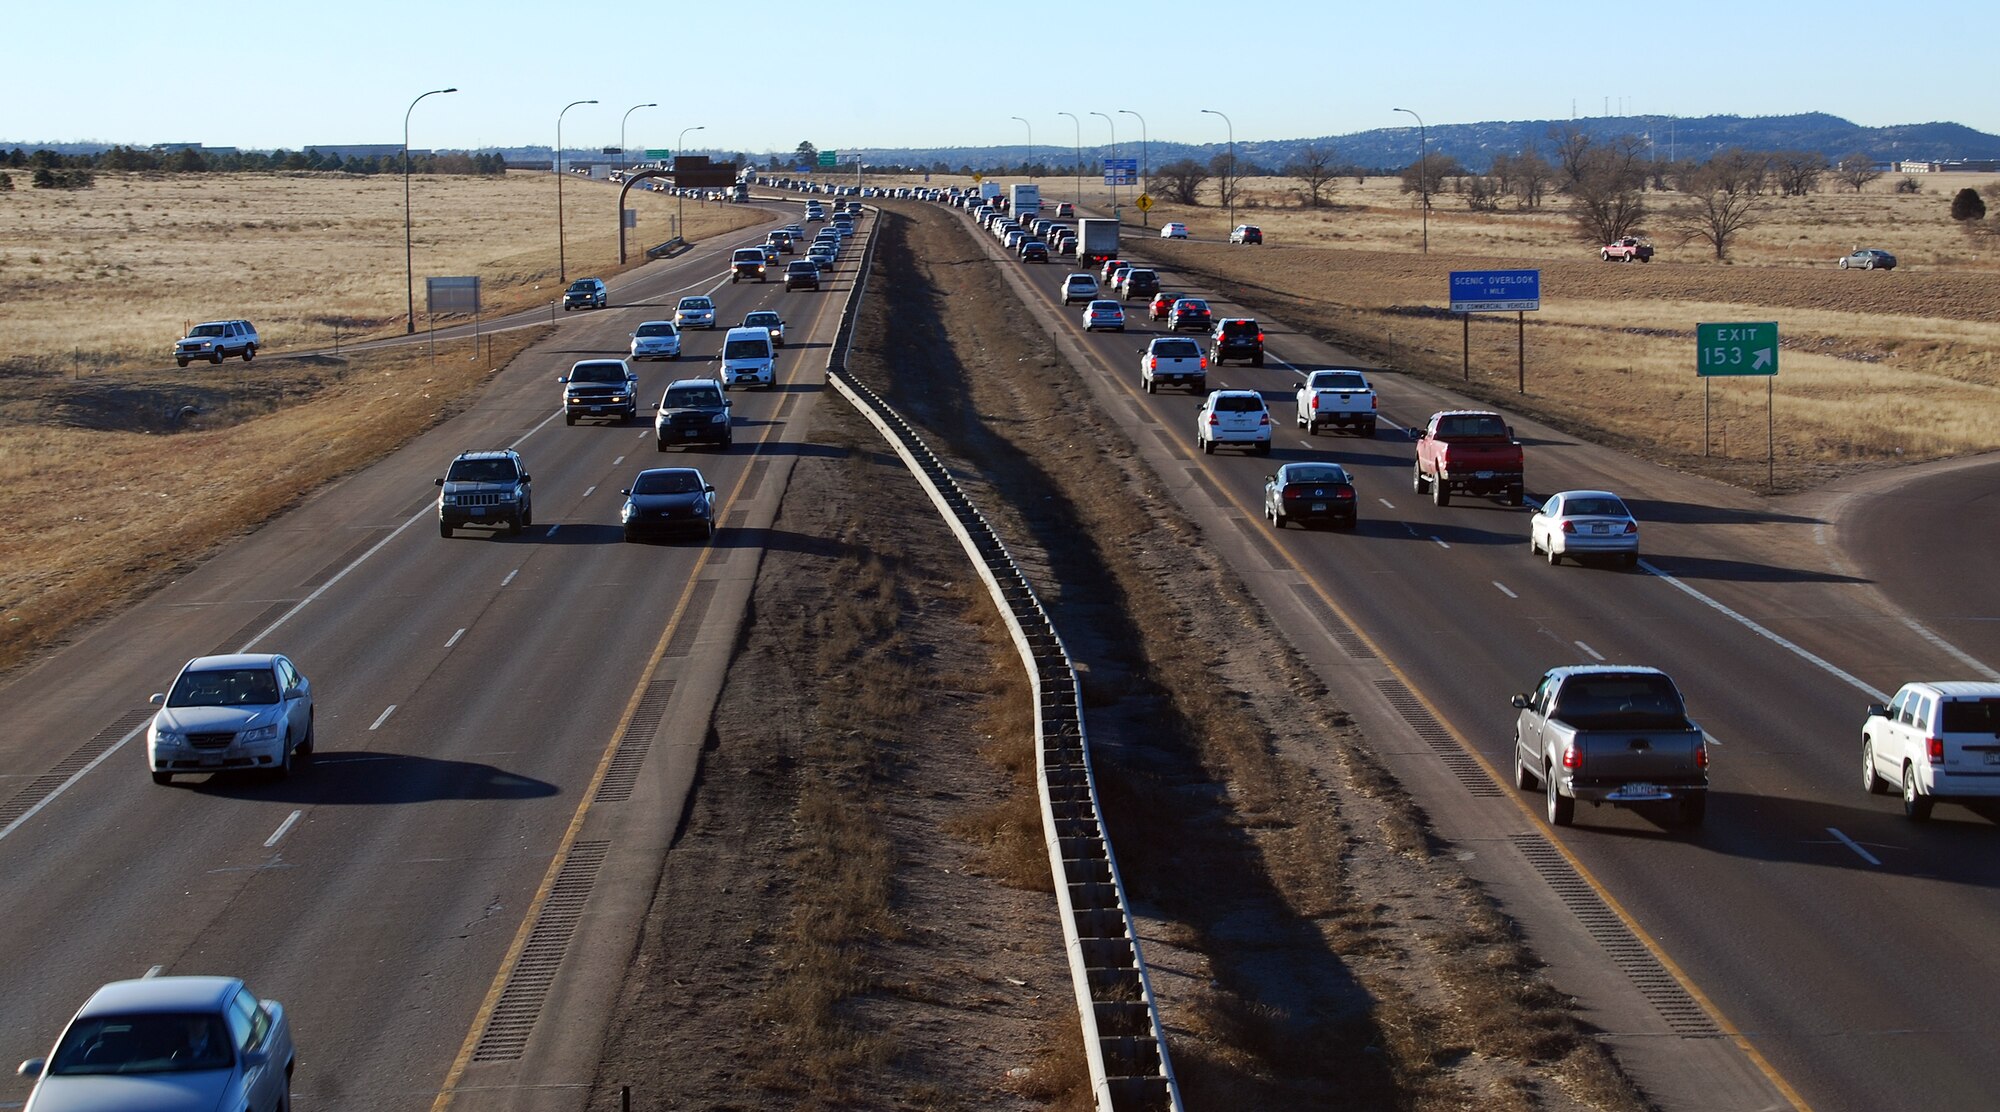 Commuters drive along Interstate 25 near Interquest Parkway Feb. 6, 2013. The Colorado Department of Transportation is scheduled to begin a construction project March 1 that will widen Interstate 25 from four lanes to six between Woodmen Road and State Highway 105 in Monument. Commuters should expect delays driving to and from the Air Force Academy while construction is underway. (U.S. Air Force photo/Don Branum)